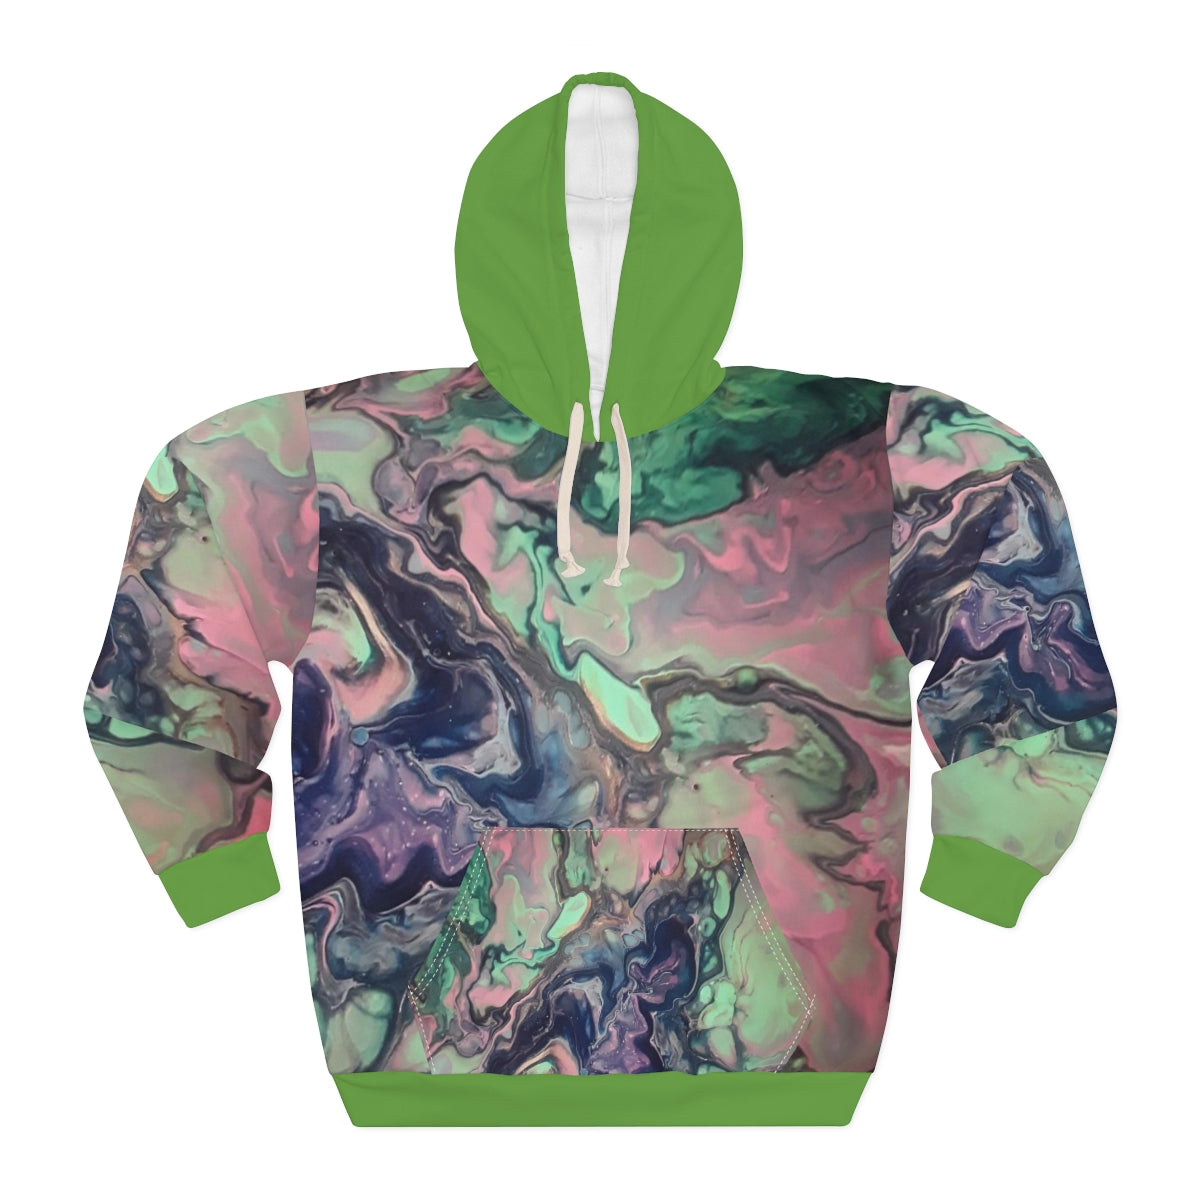 ALL OVER PRINT PUULOVER HOODIE, ABSTRART ART PRINTED HOODIE FOR MEN AND WOMEN